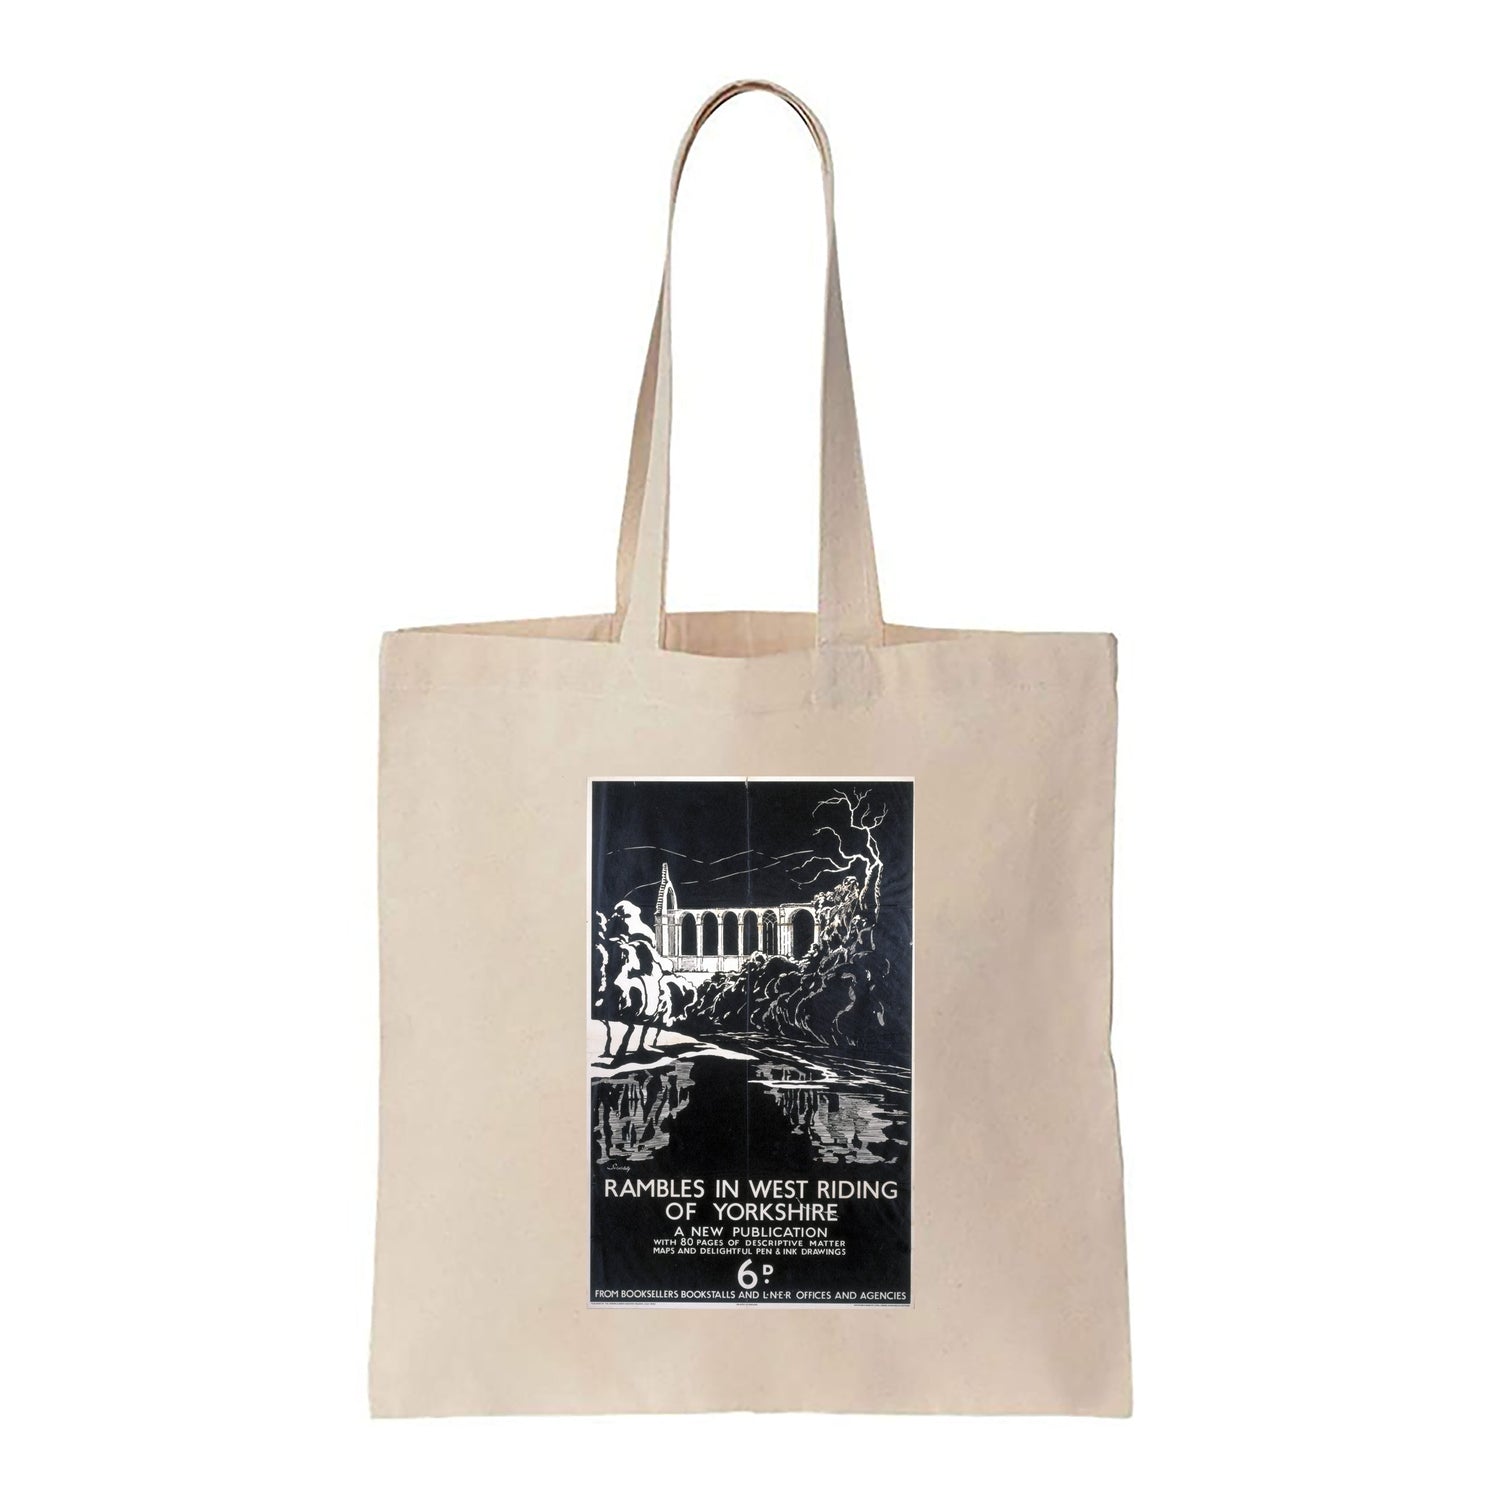 Rambles in West Riding Yorkshire - Canvas Tote Bag